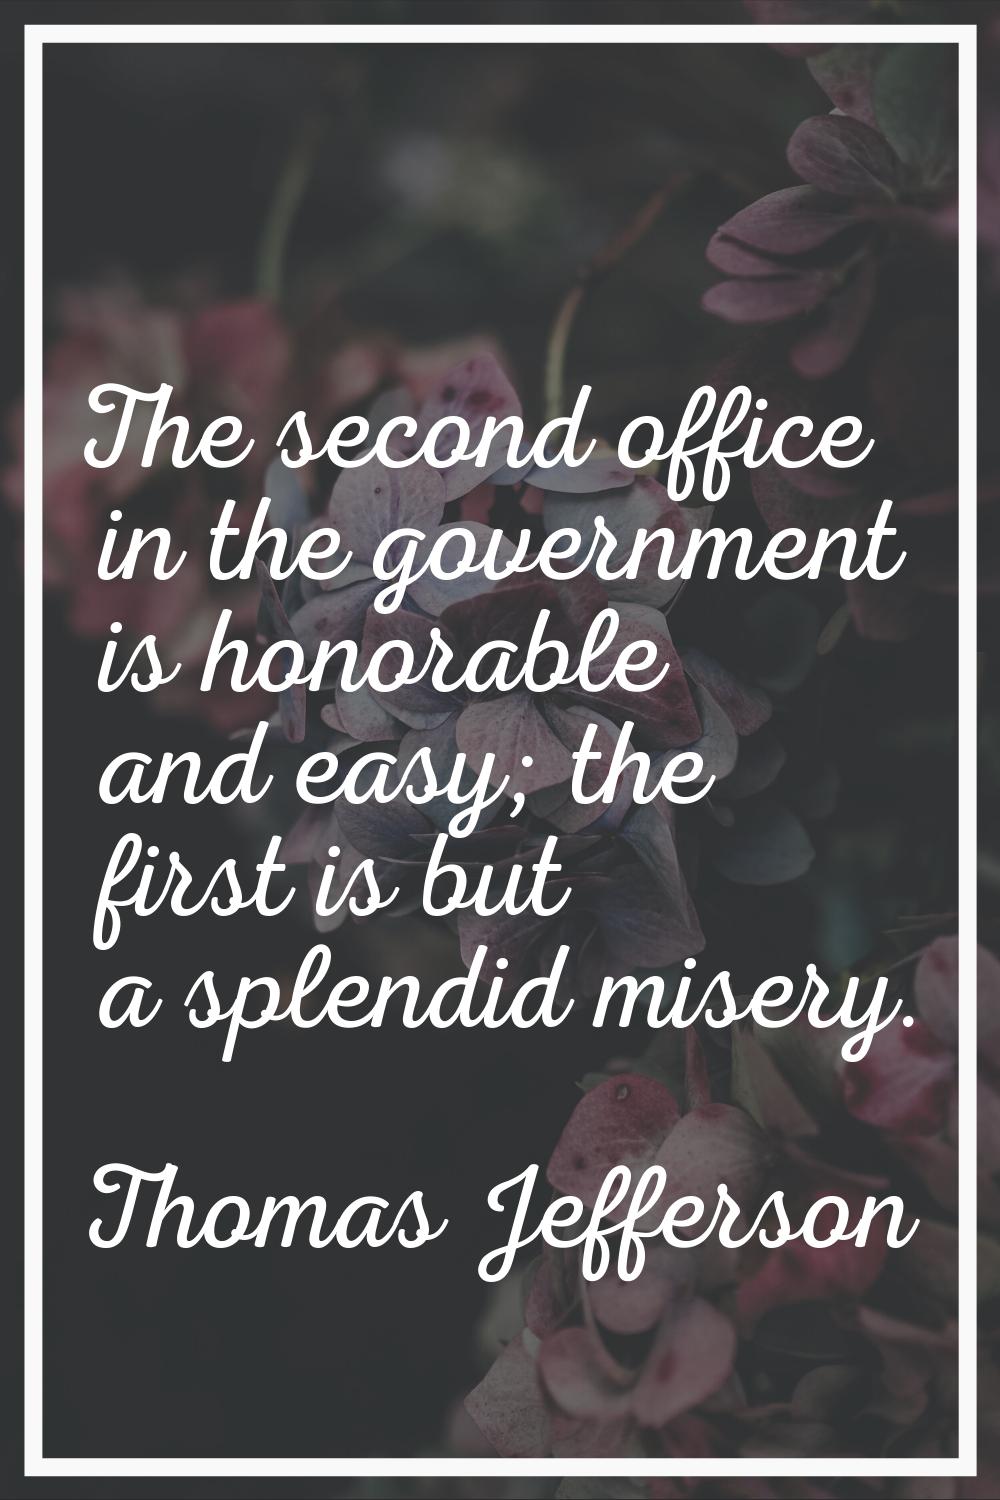 The second office in the government is honorable and easy; the first is but a splendid misery.